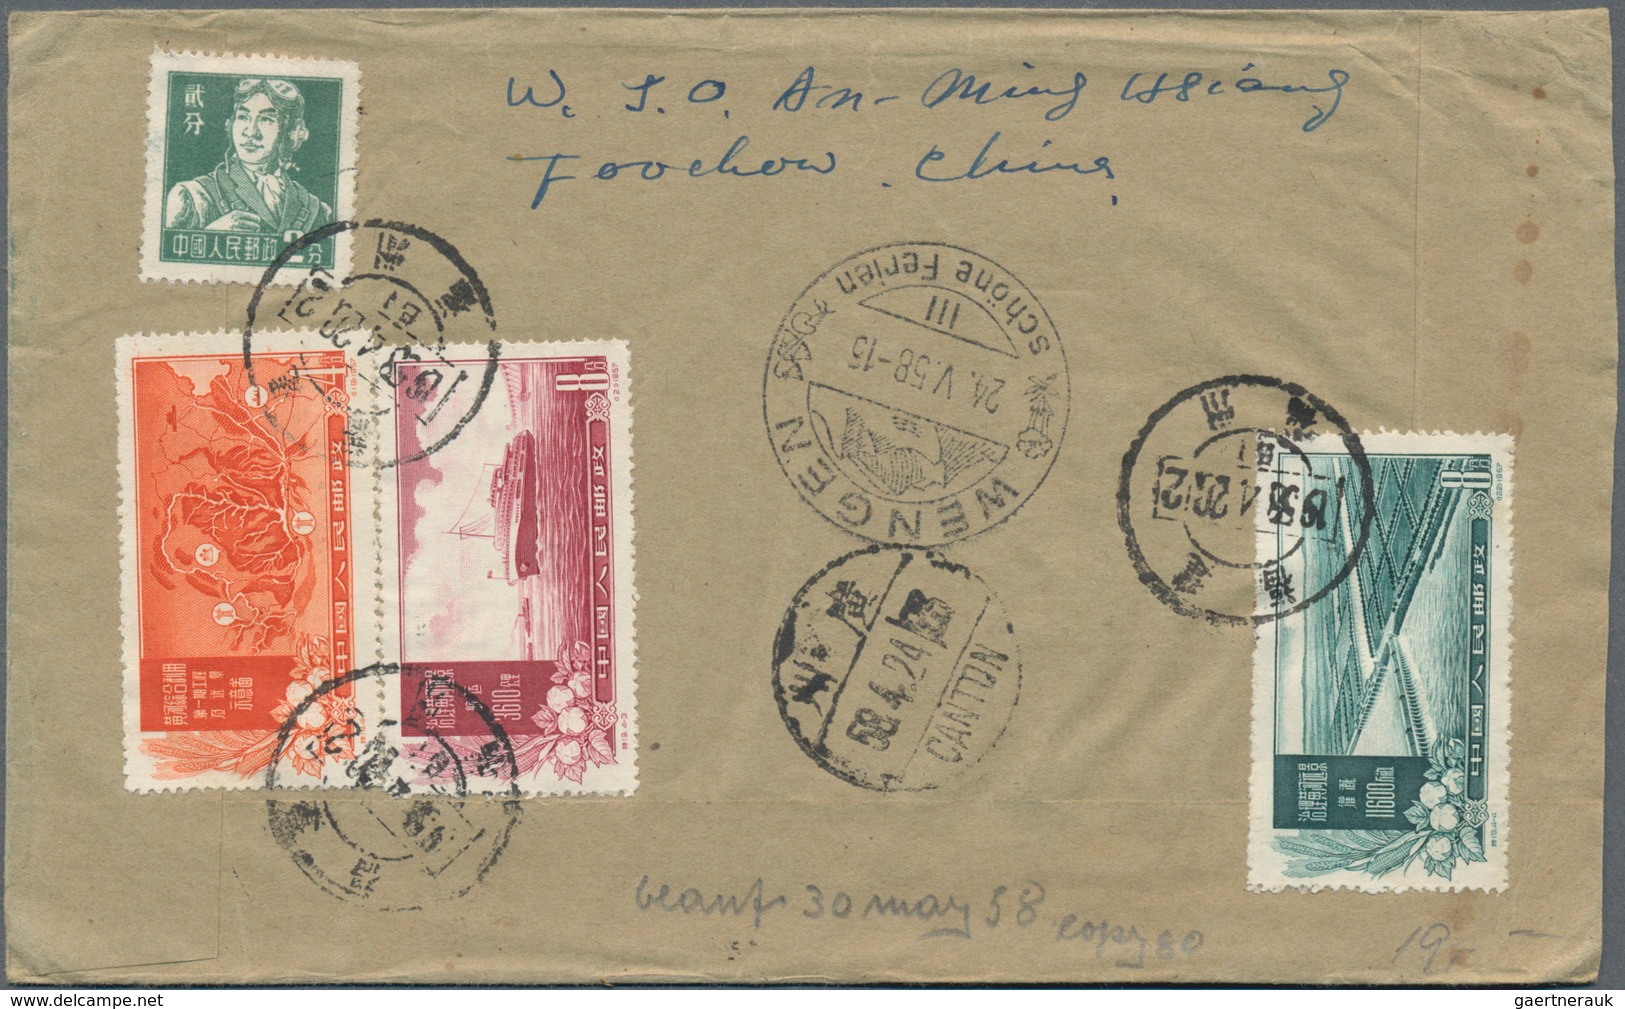 China - Volksrepublik - Ganzsachen: 1955/62 (ca.), 15 covers with commemoratives mostly to Germany o